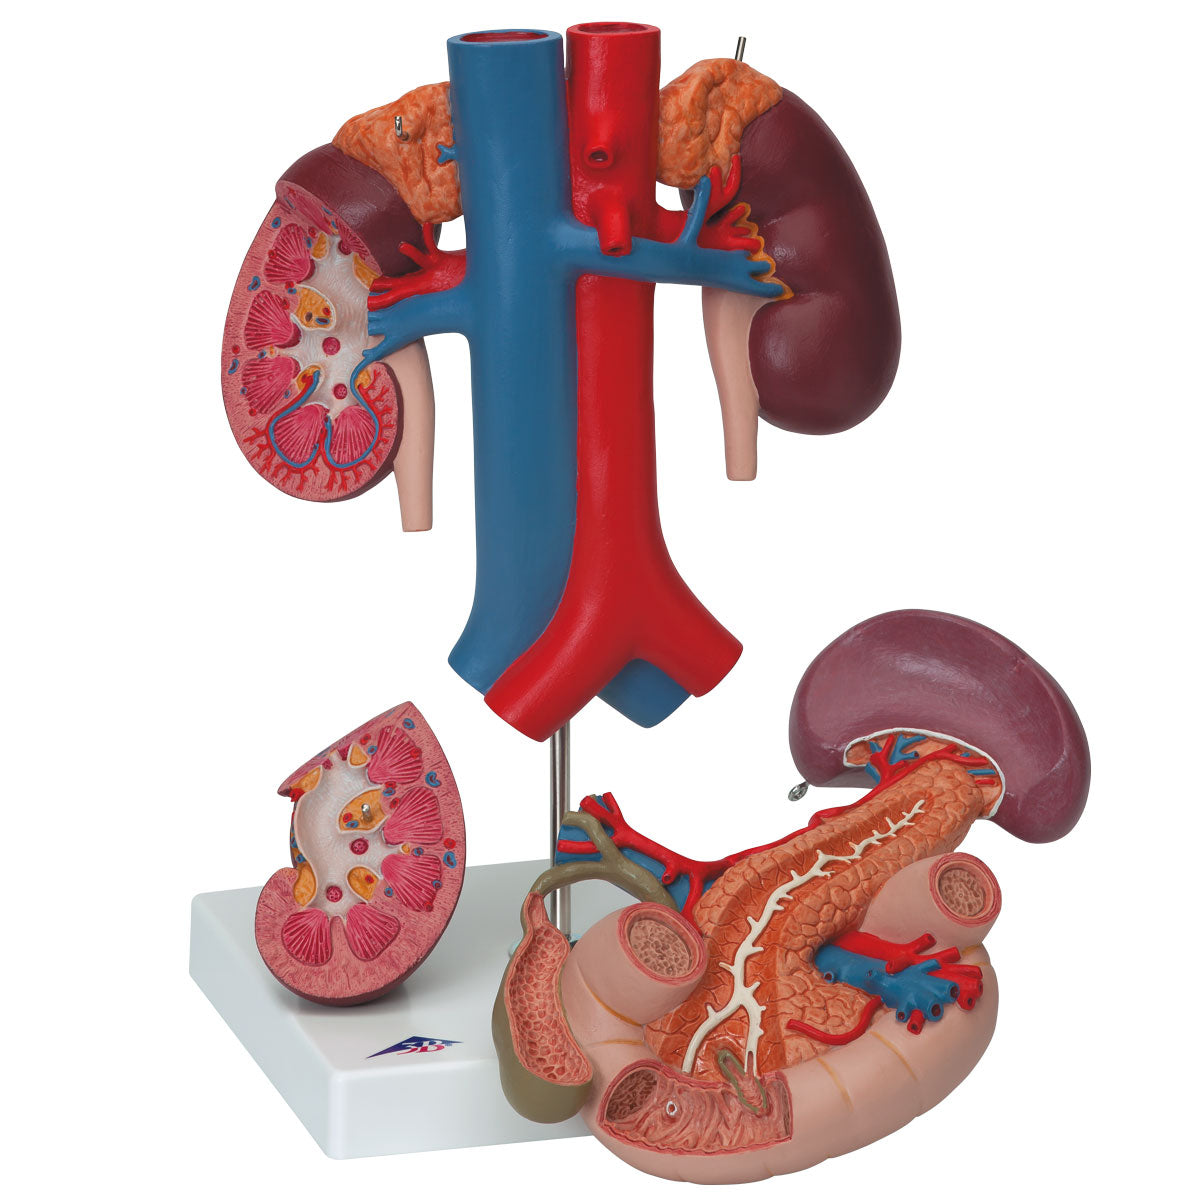 Detailed model of the duodenum and the relationship of the pancreas to other organs - can be separated into 3 parts